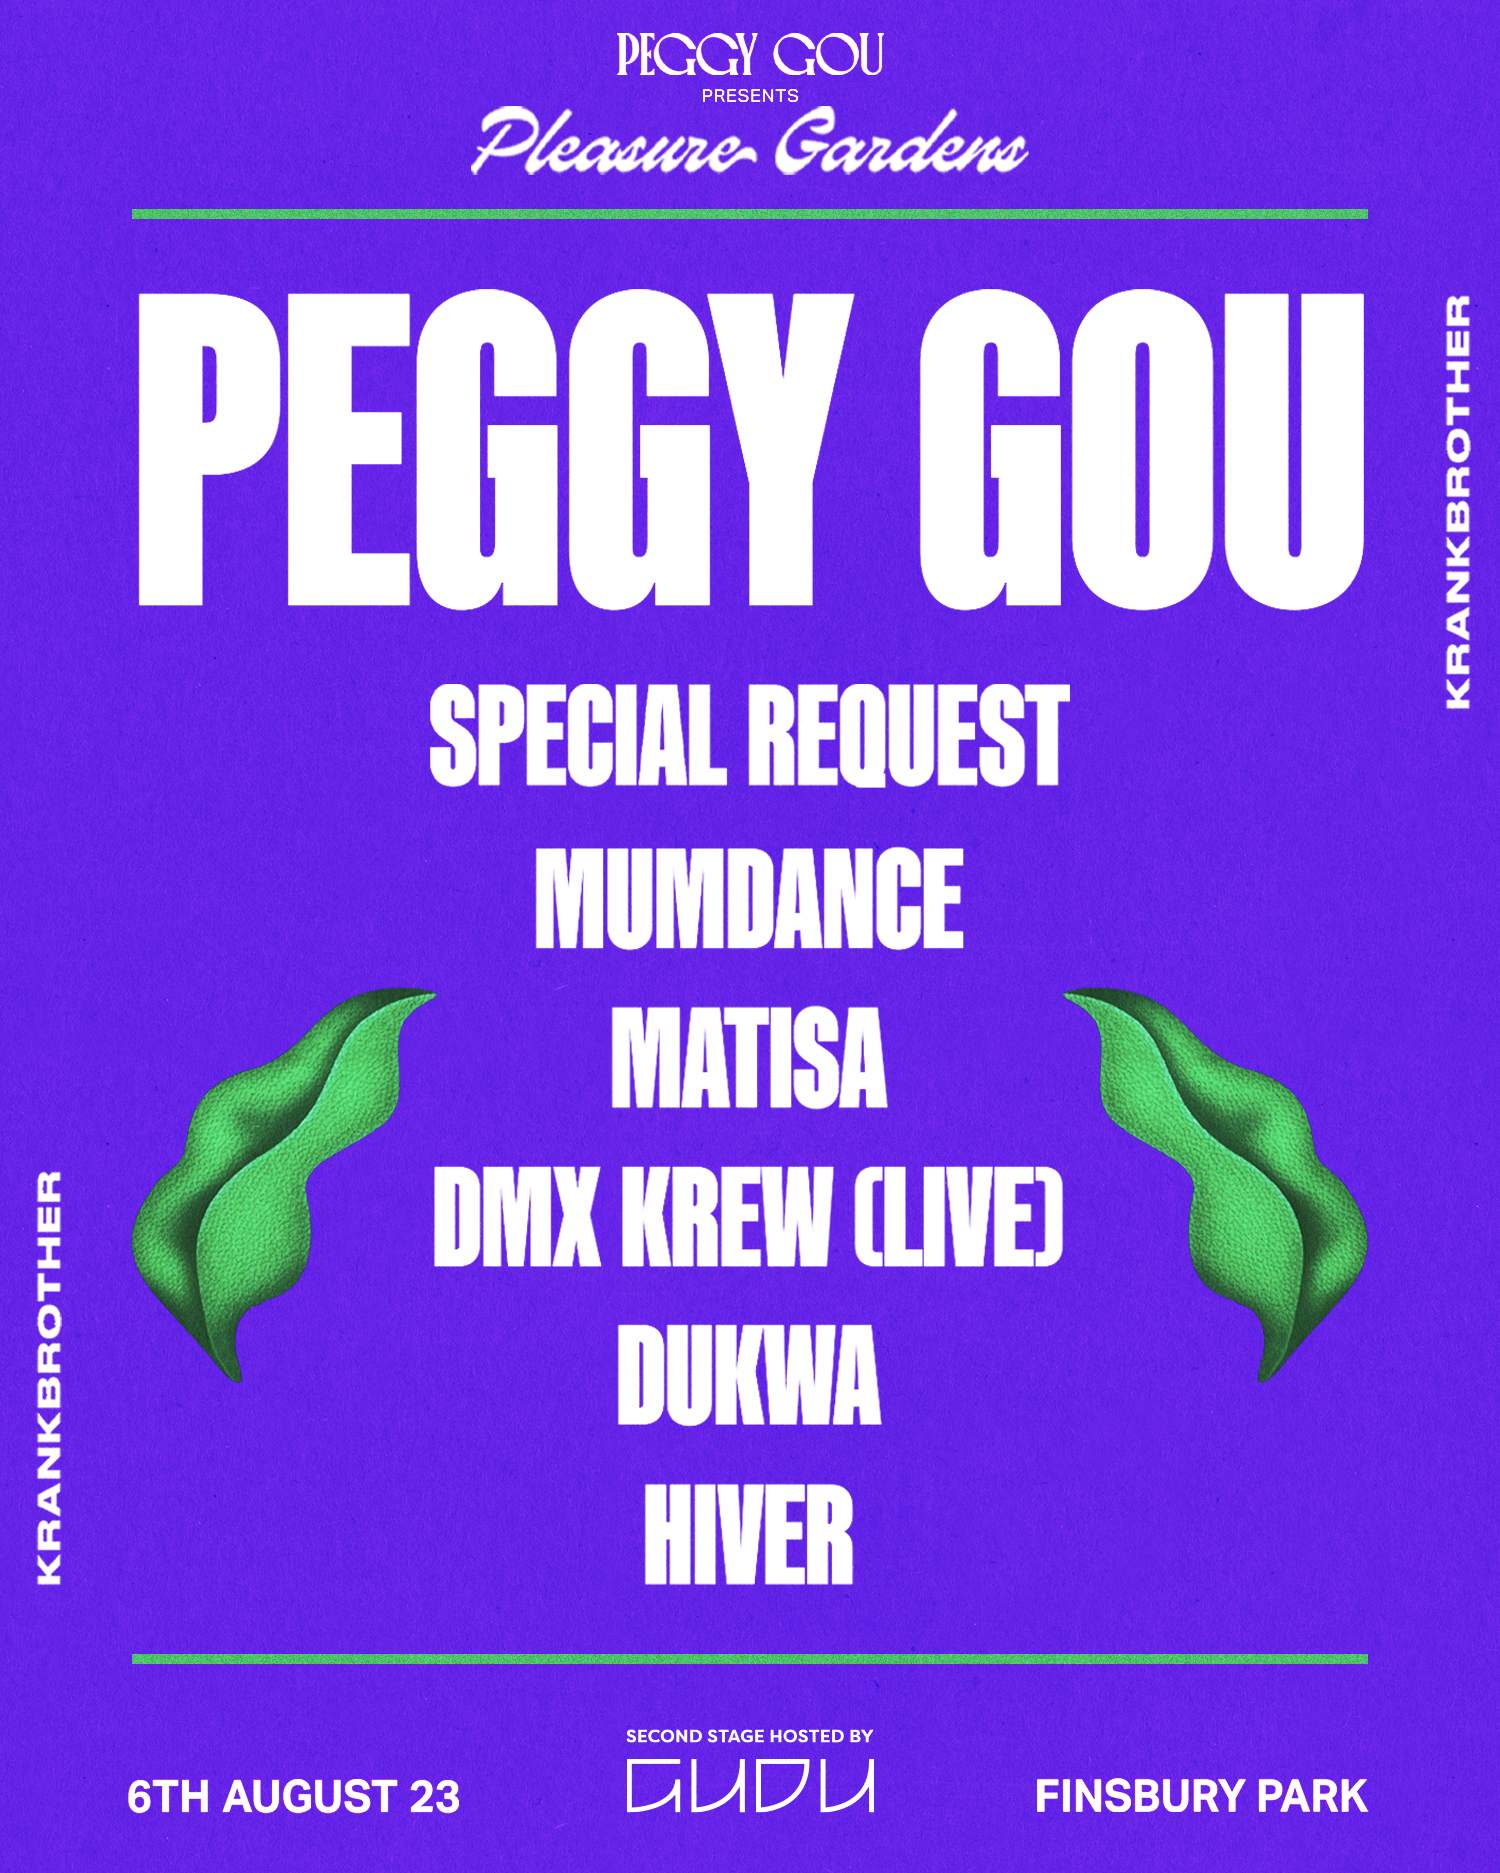 [SOLD OUT] Peggy Gou presents Pleasure Gardens - Página frontal